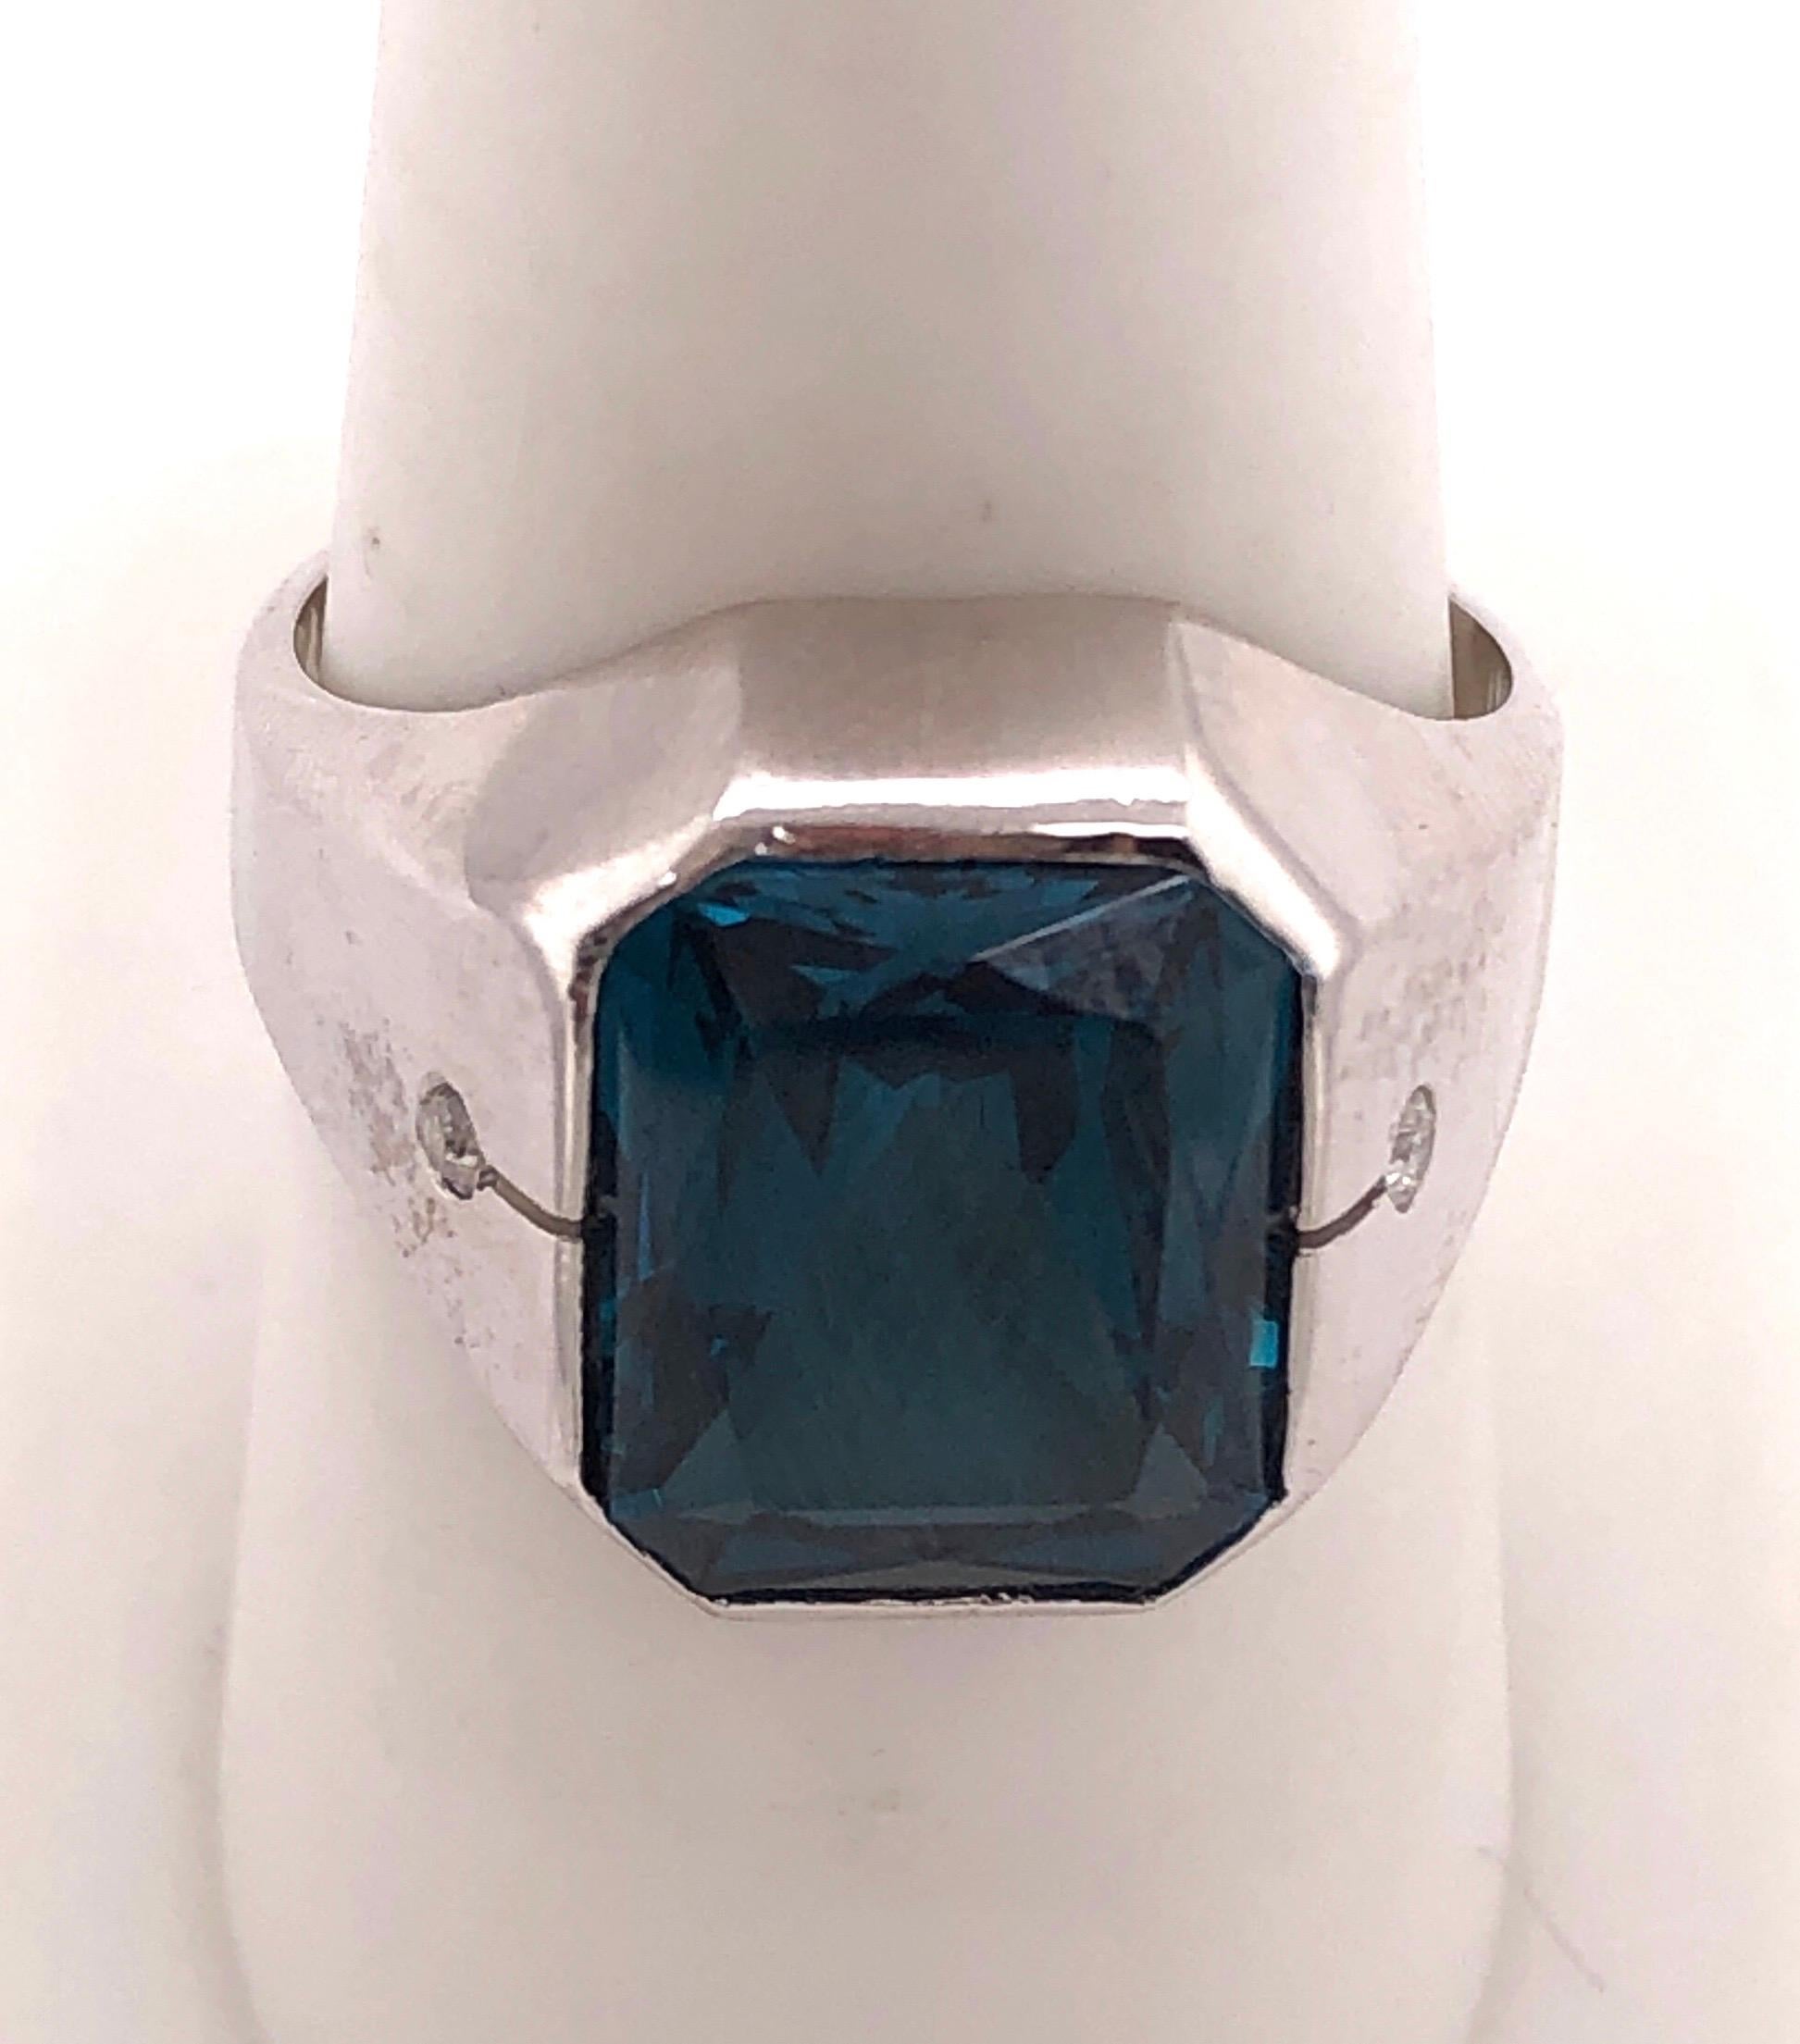 14 Karat White Gold Handmade Blue Sapphire Solitaire With Diamond Accents Ring. Impressive.  
Size 9 7.70 grams total weight